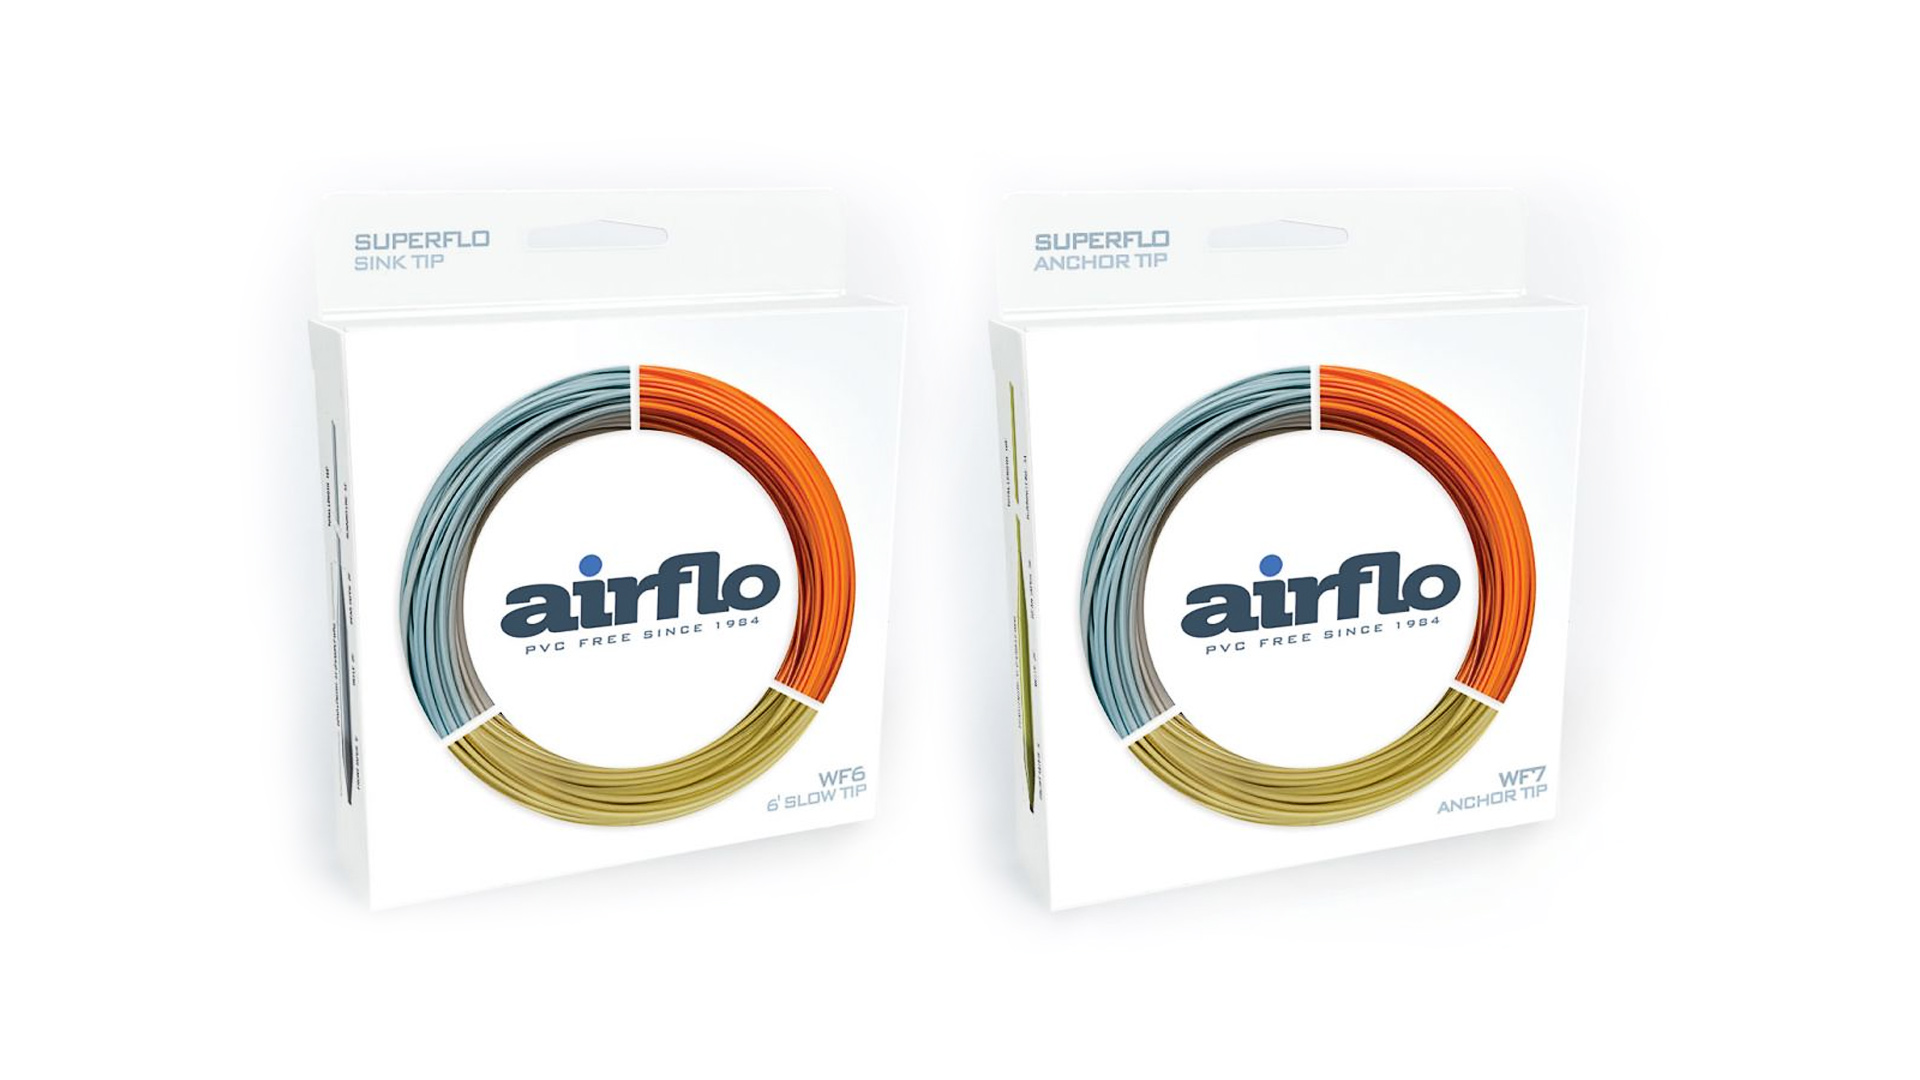 Airflo sink and anchor tip lines